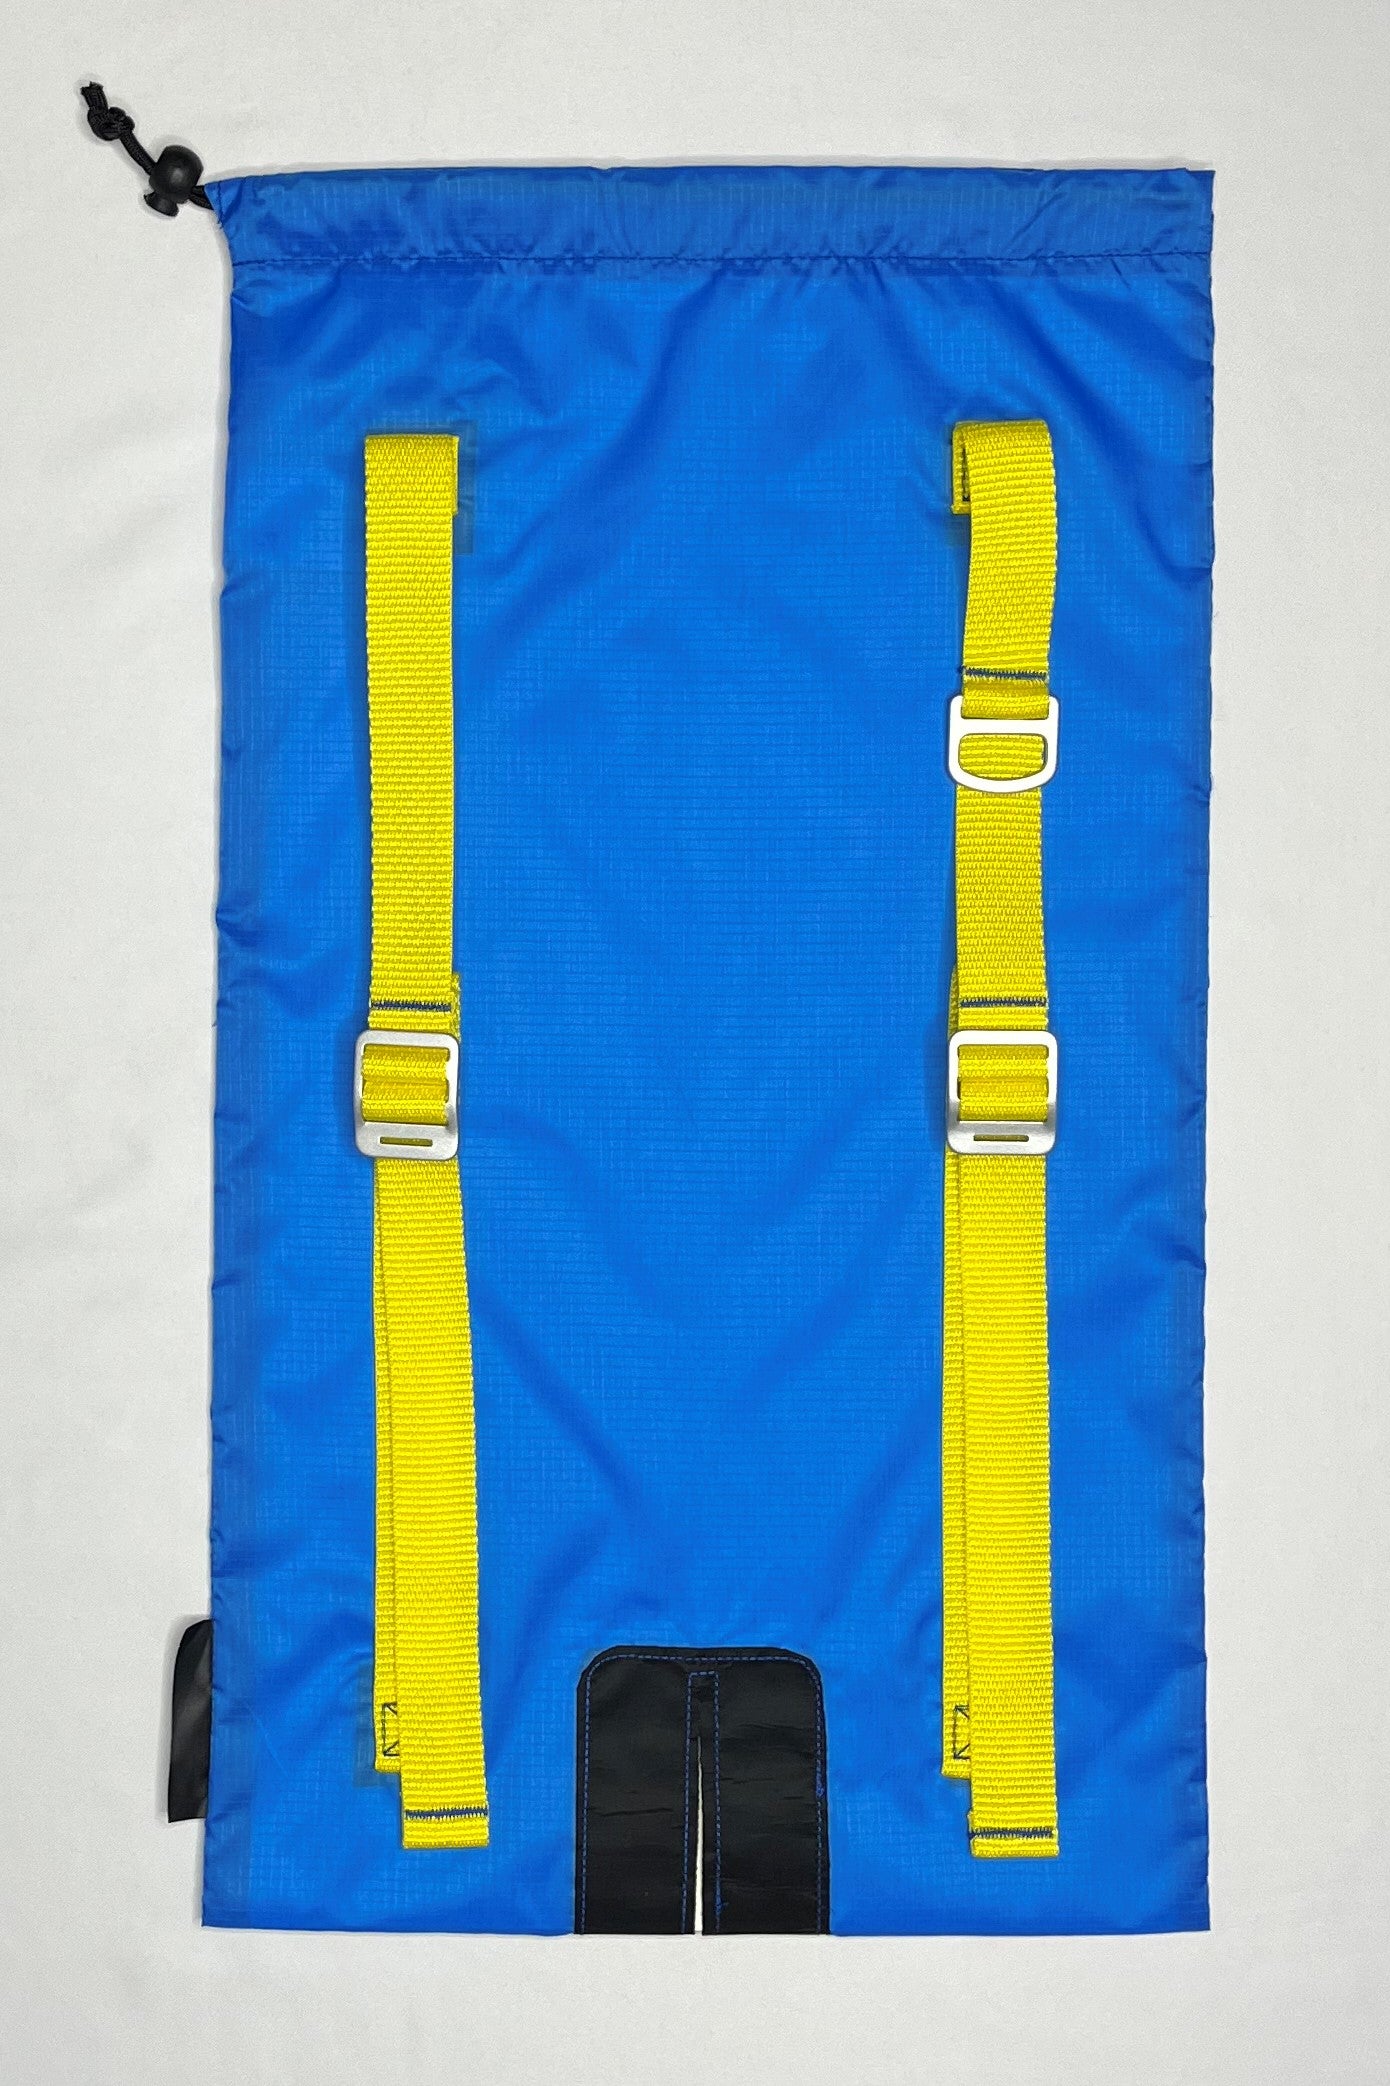 Back image of the Blue Ski Pack with Yellow straps and aluminum strap adjusters and d-ring